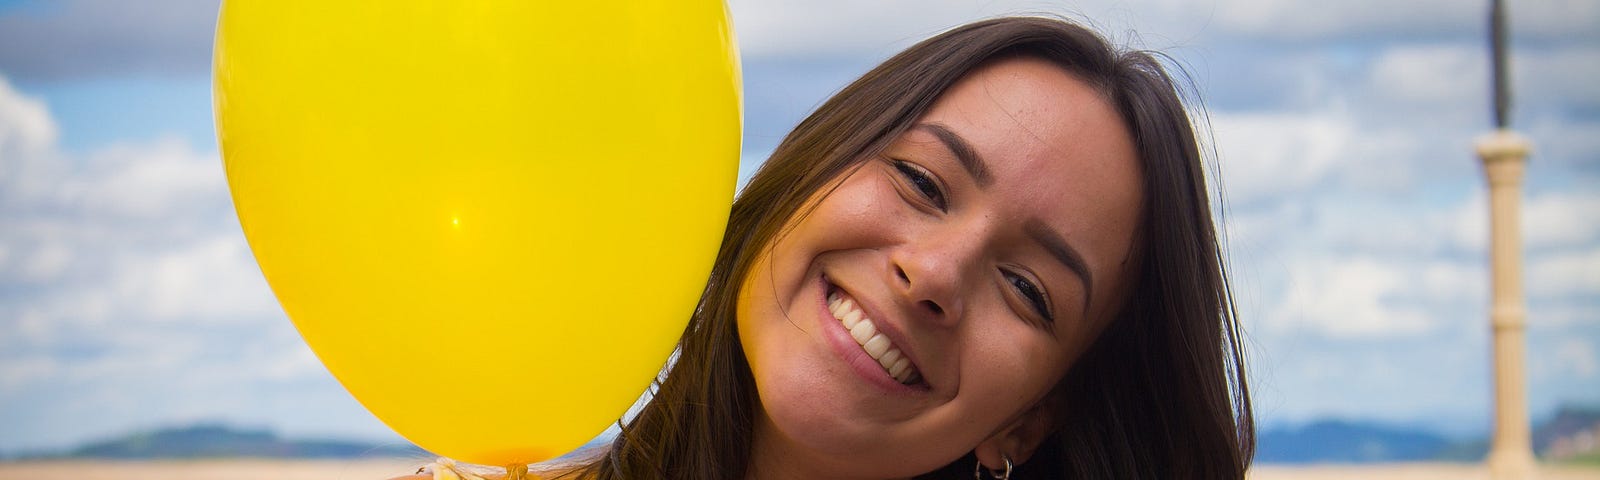 Young woman with long dark hair smiling with her head tilted to her left. On her right, by her face, is a yellow balloon.